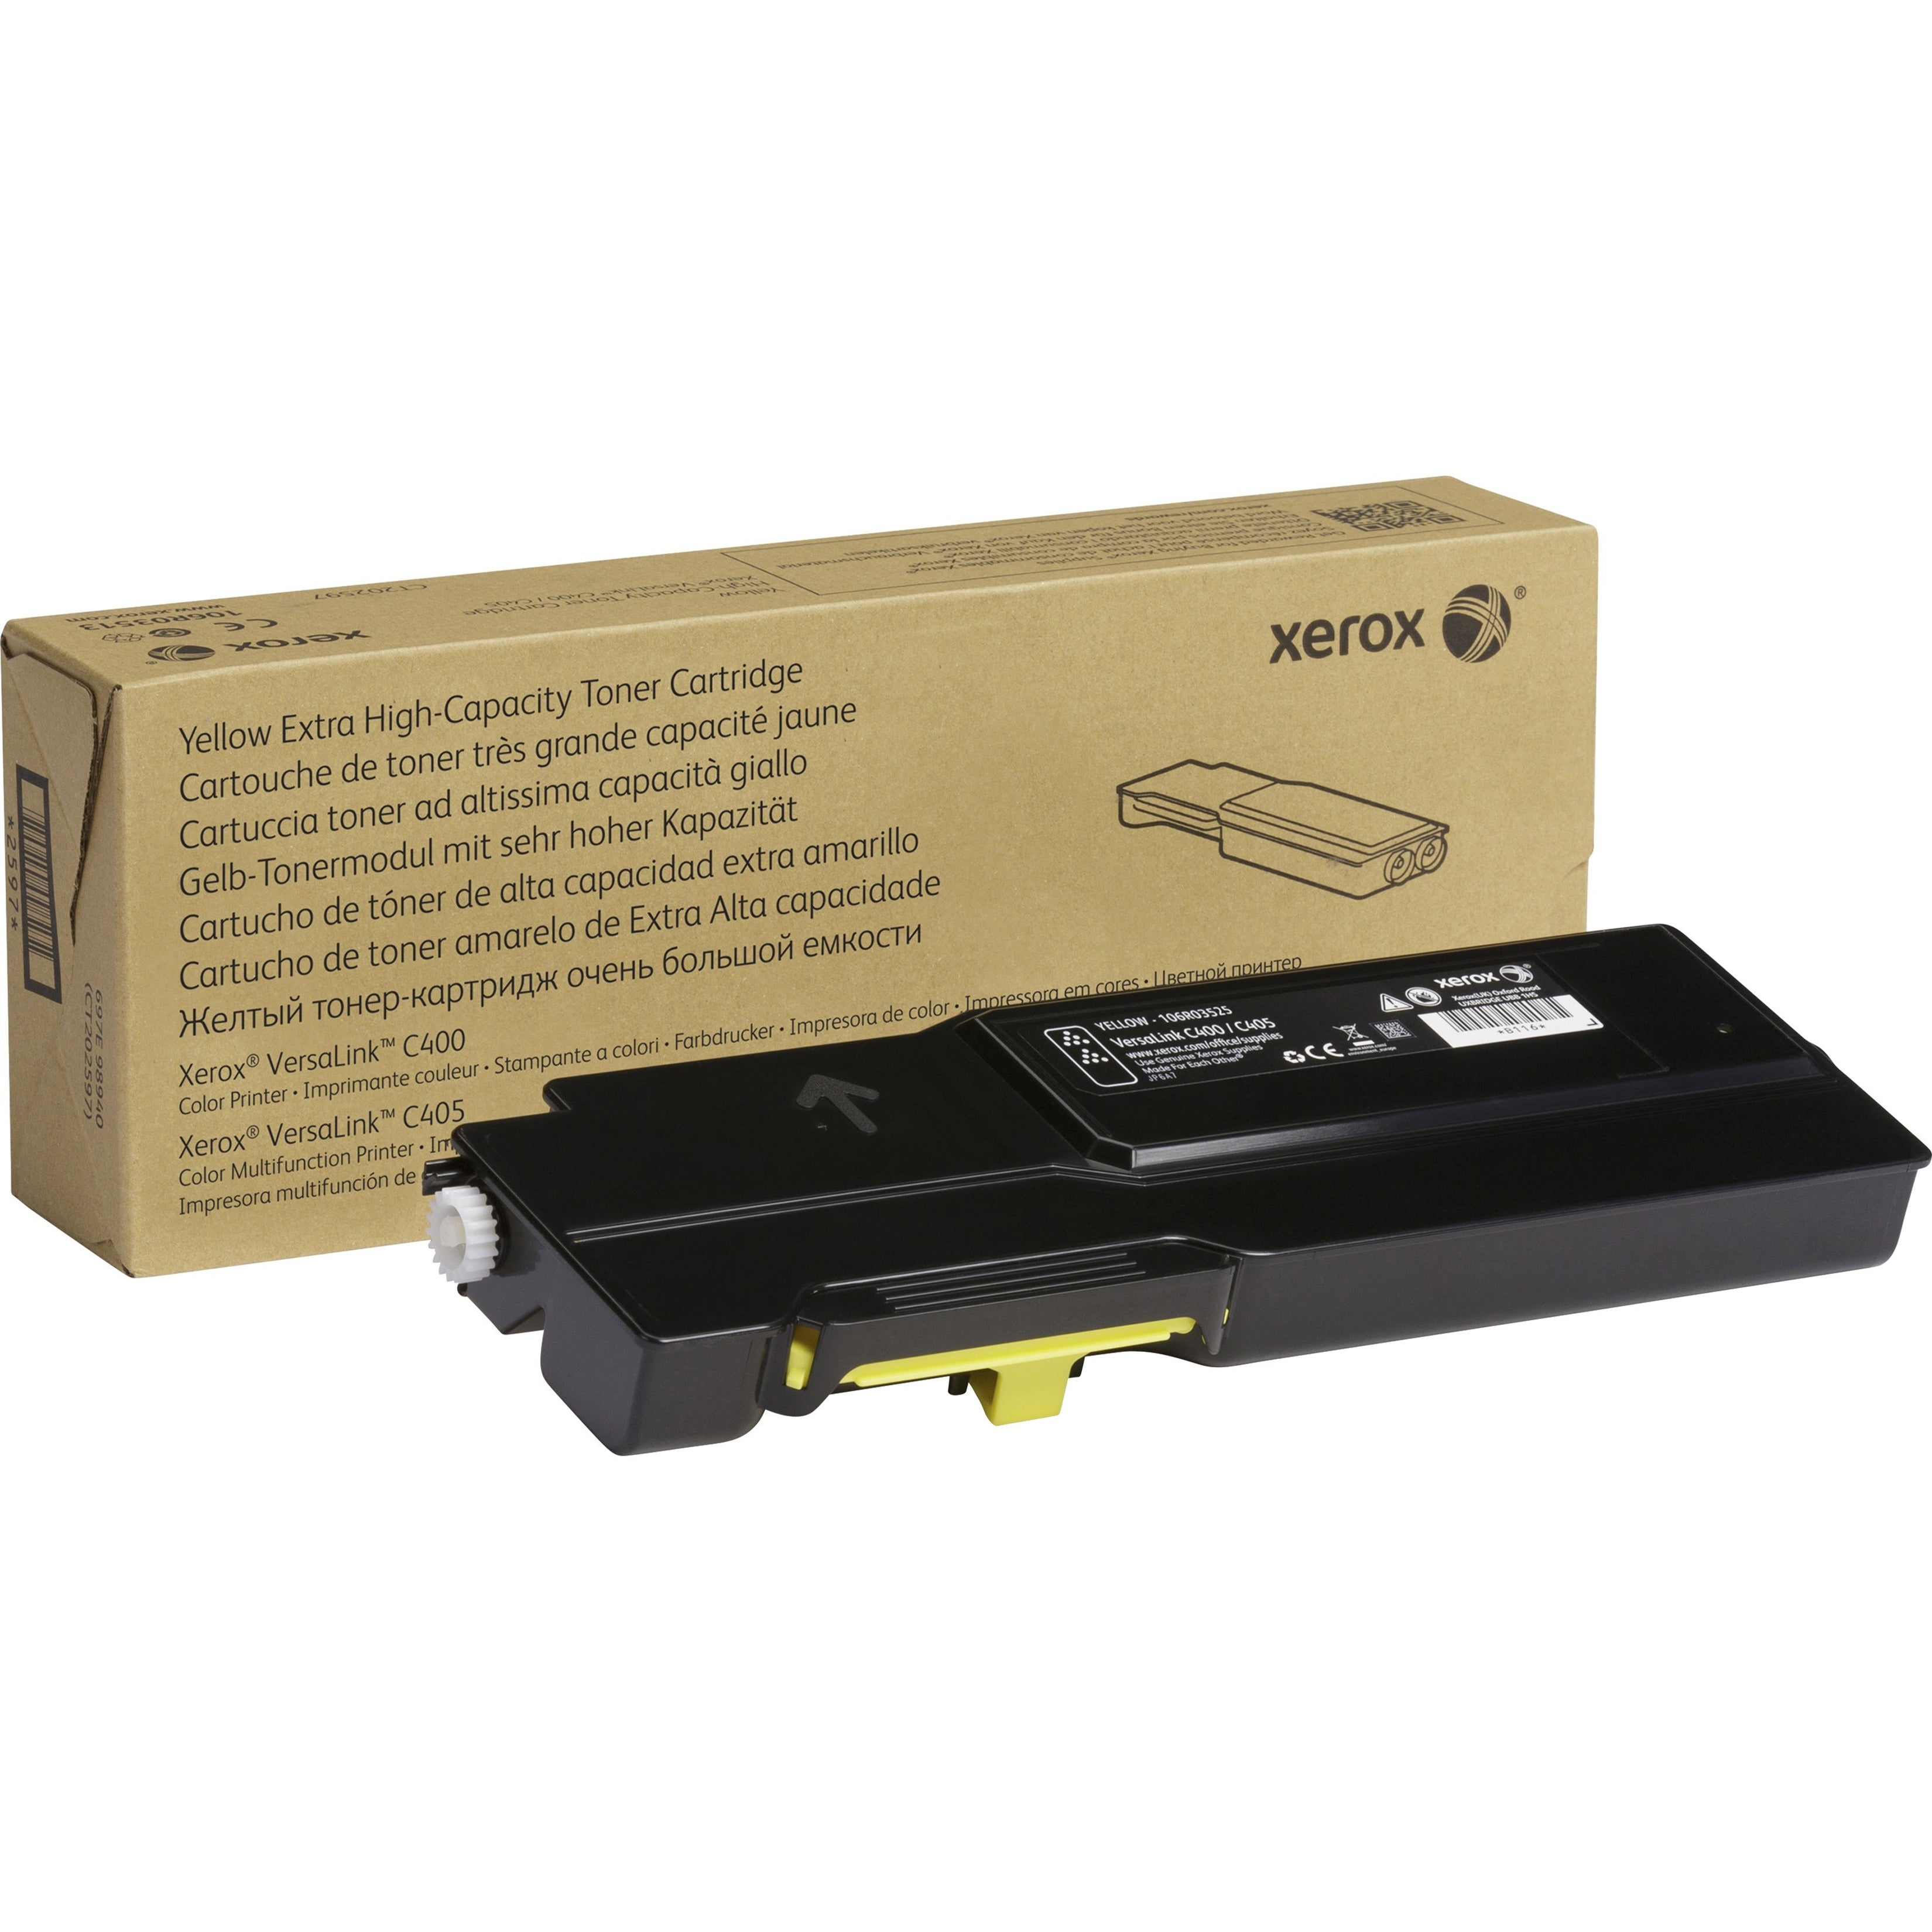 Xerox 106R03525 Genuine Yellow Extra High Capacity Toner Cartridge For The VersaLink C400/C405, 8000 Pages